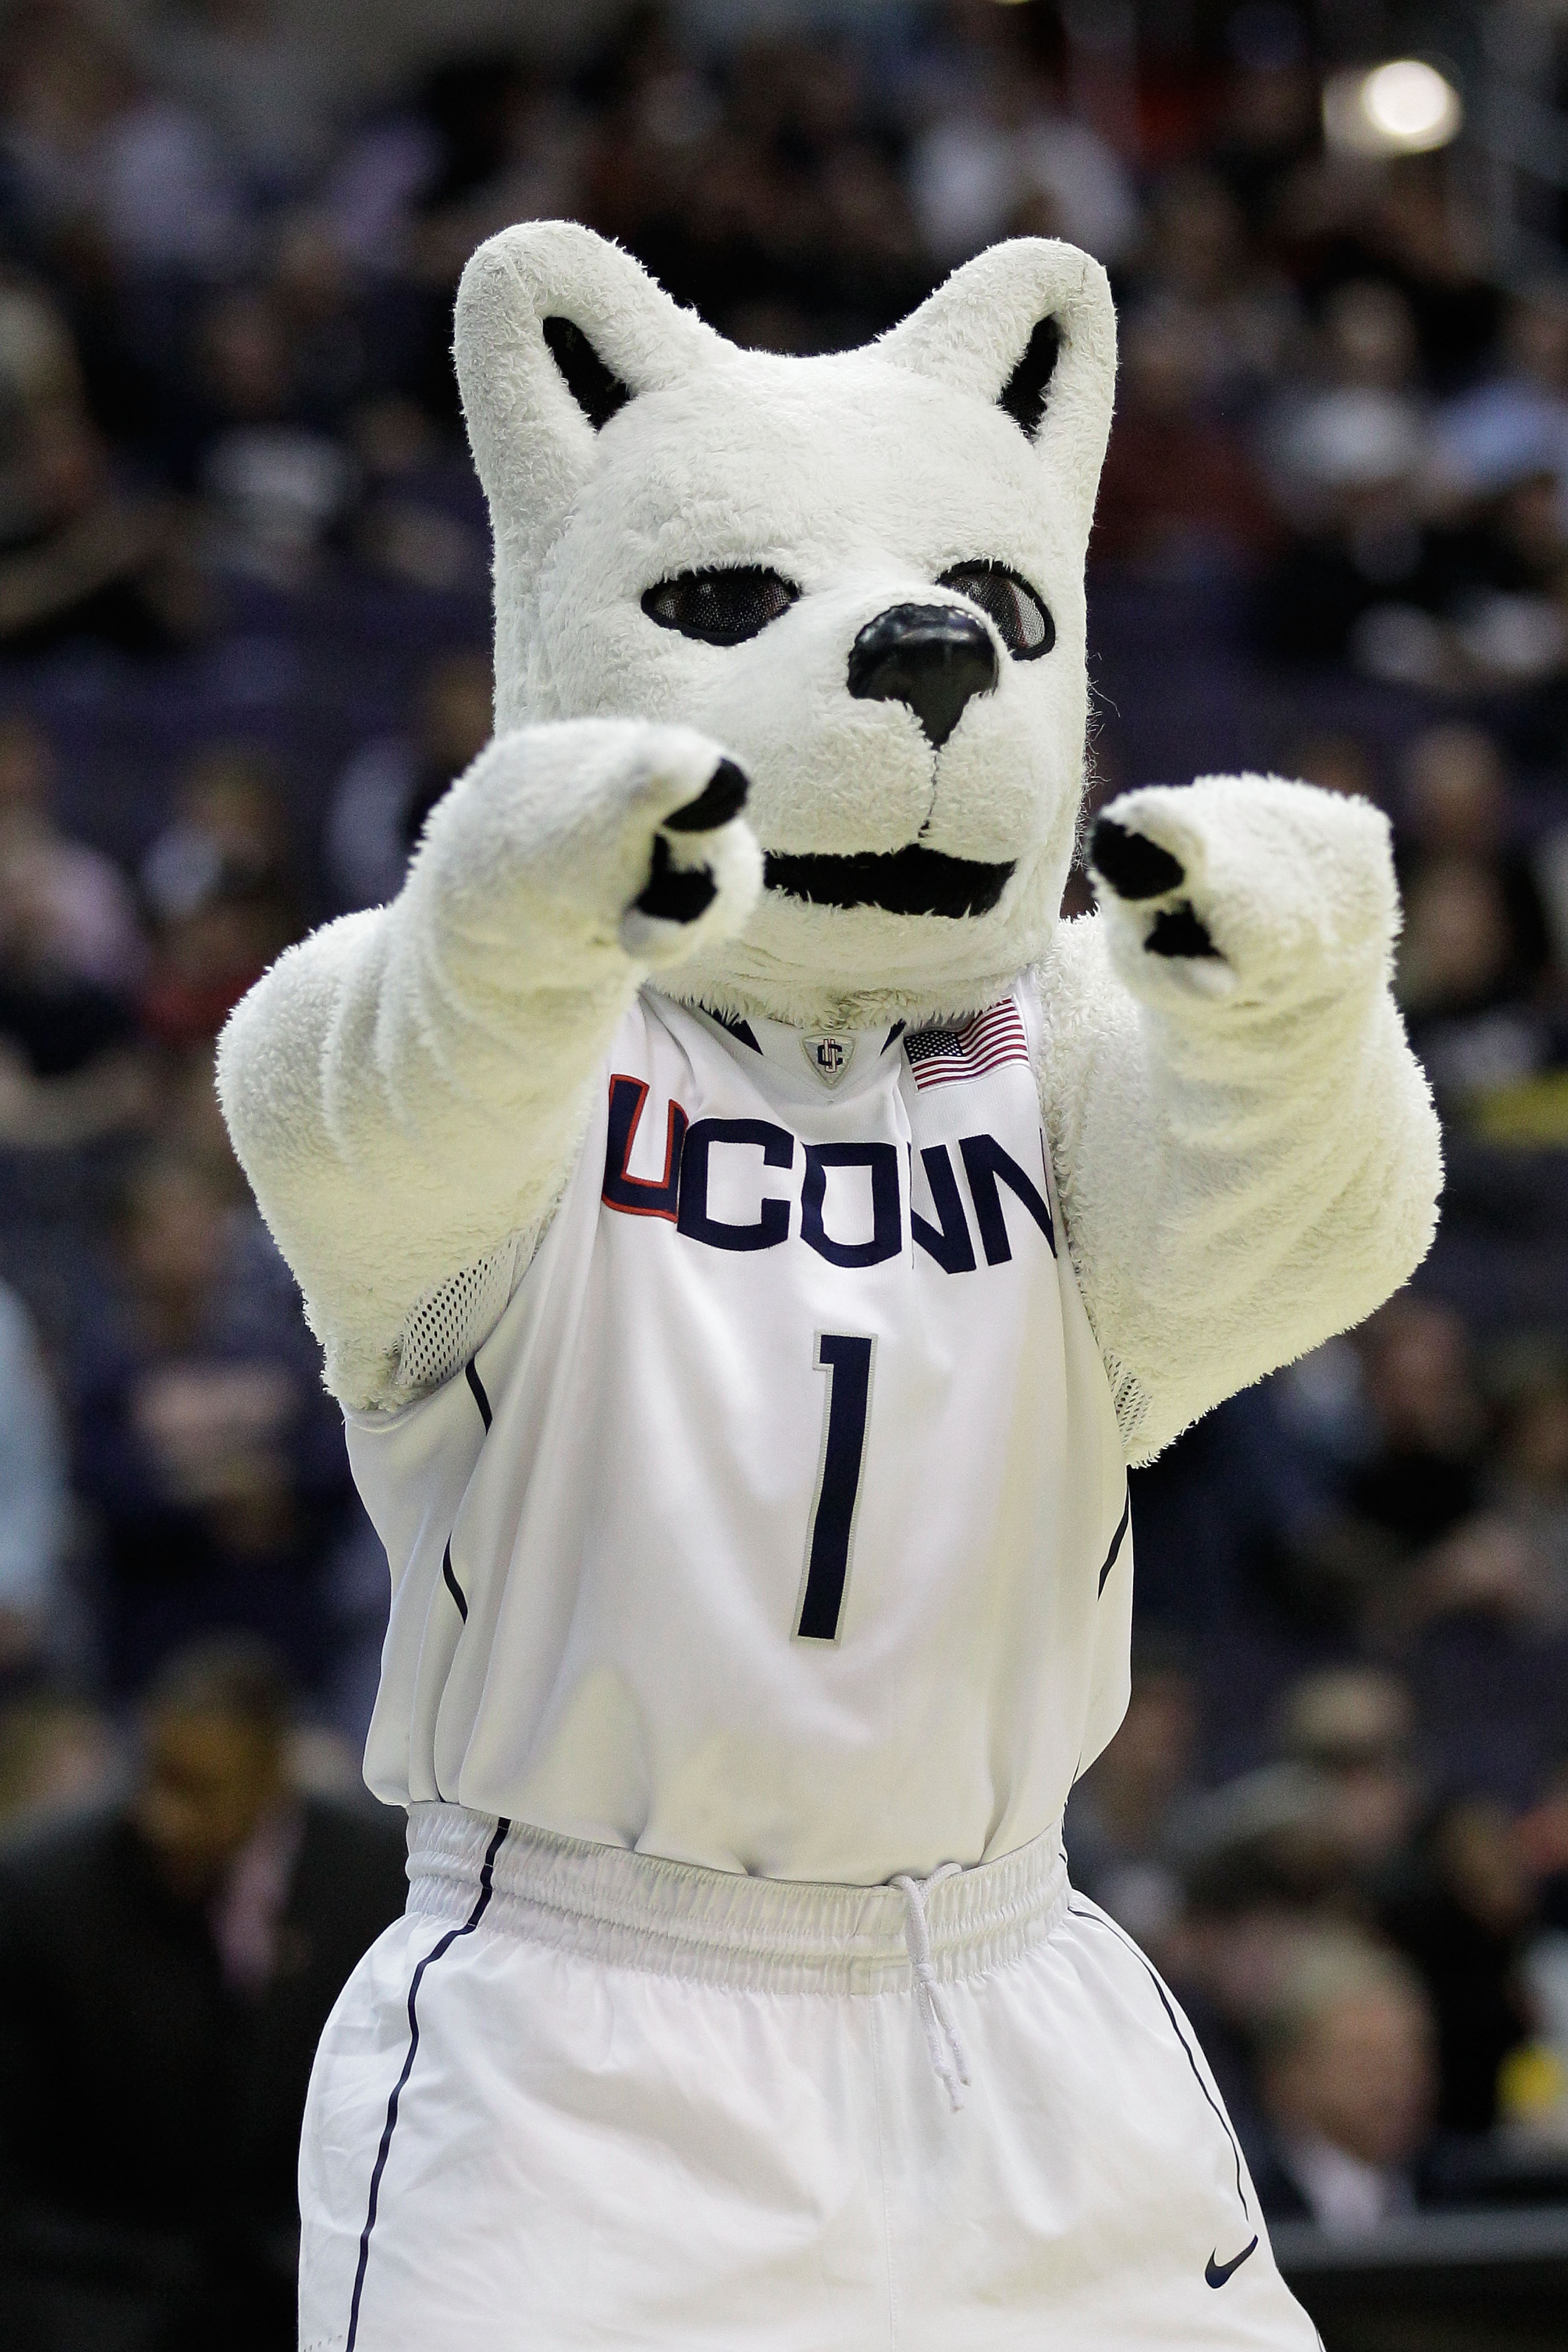 WASHINGTON - MARCH 19:  The Connecticut Huskies mascot performs during their game against the Cincinnati Bearcats during the third round of the 2011 NCAA men's basketball tournament at Verizon Center on March 19, 2011 in Washington, DC.  (Photo by Rob Car